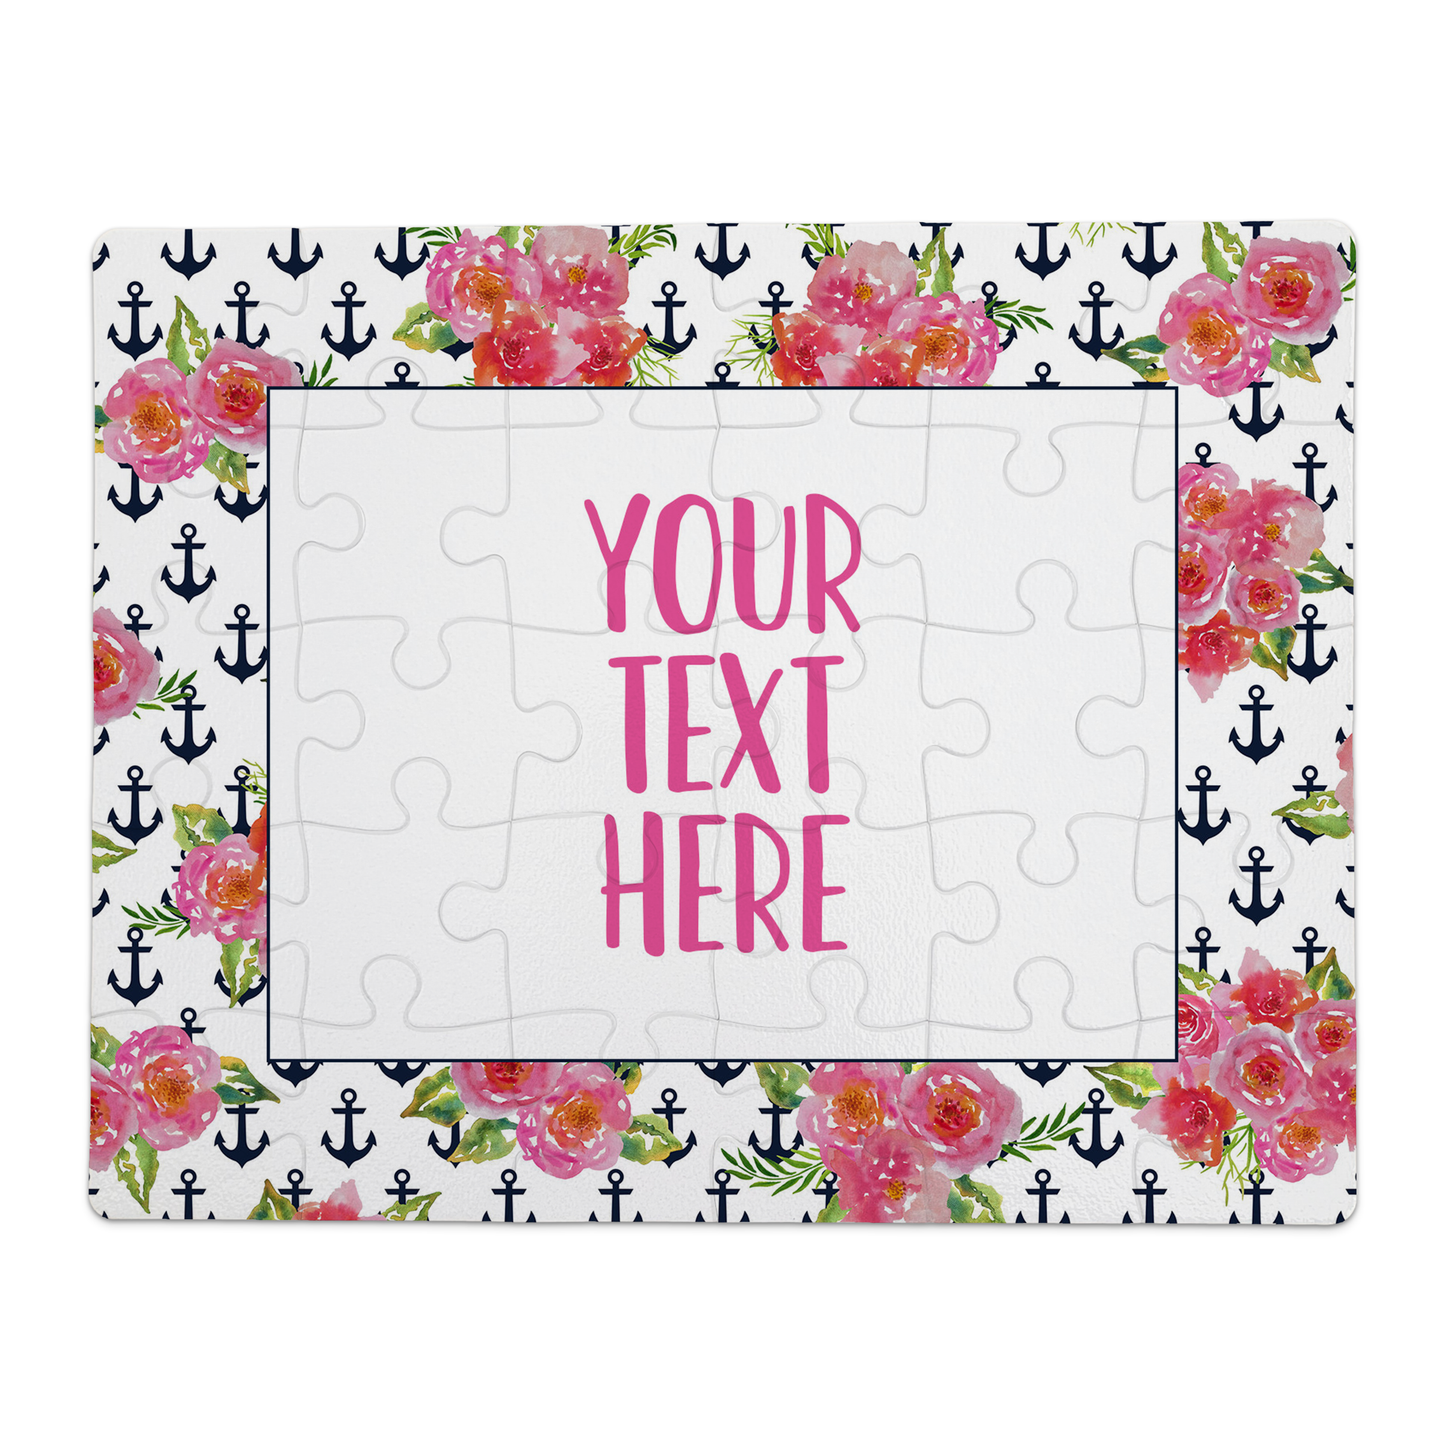 Create Your Own Puzzle - Floral & Anchors Design - CYOP0044 | S'Berry Boutique